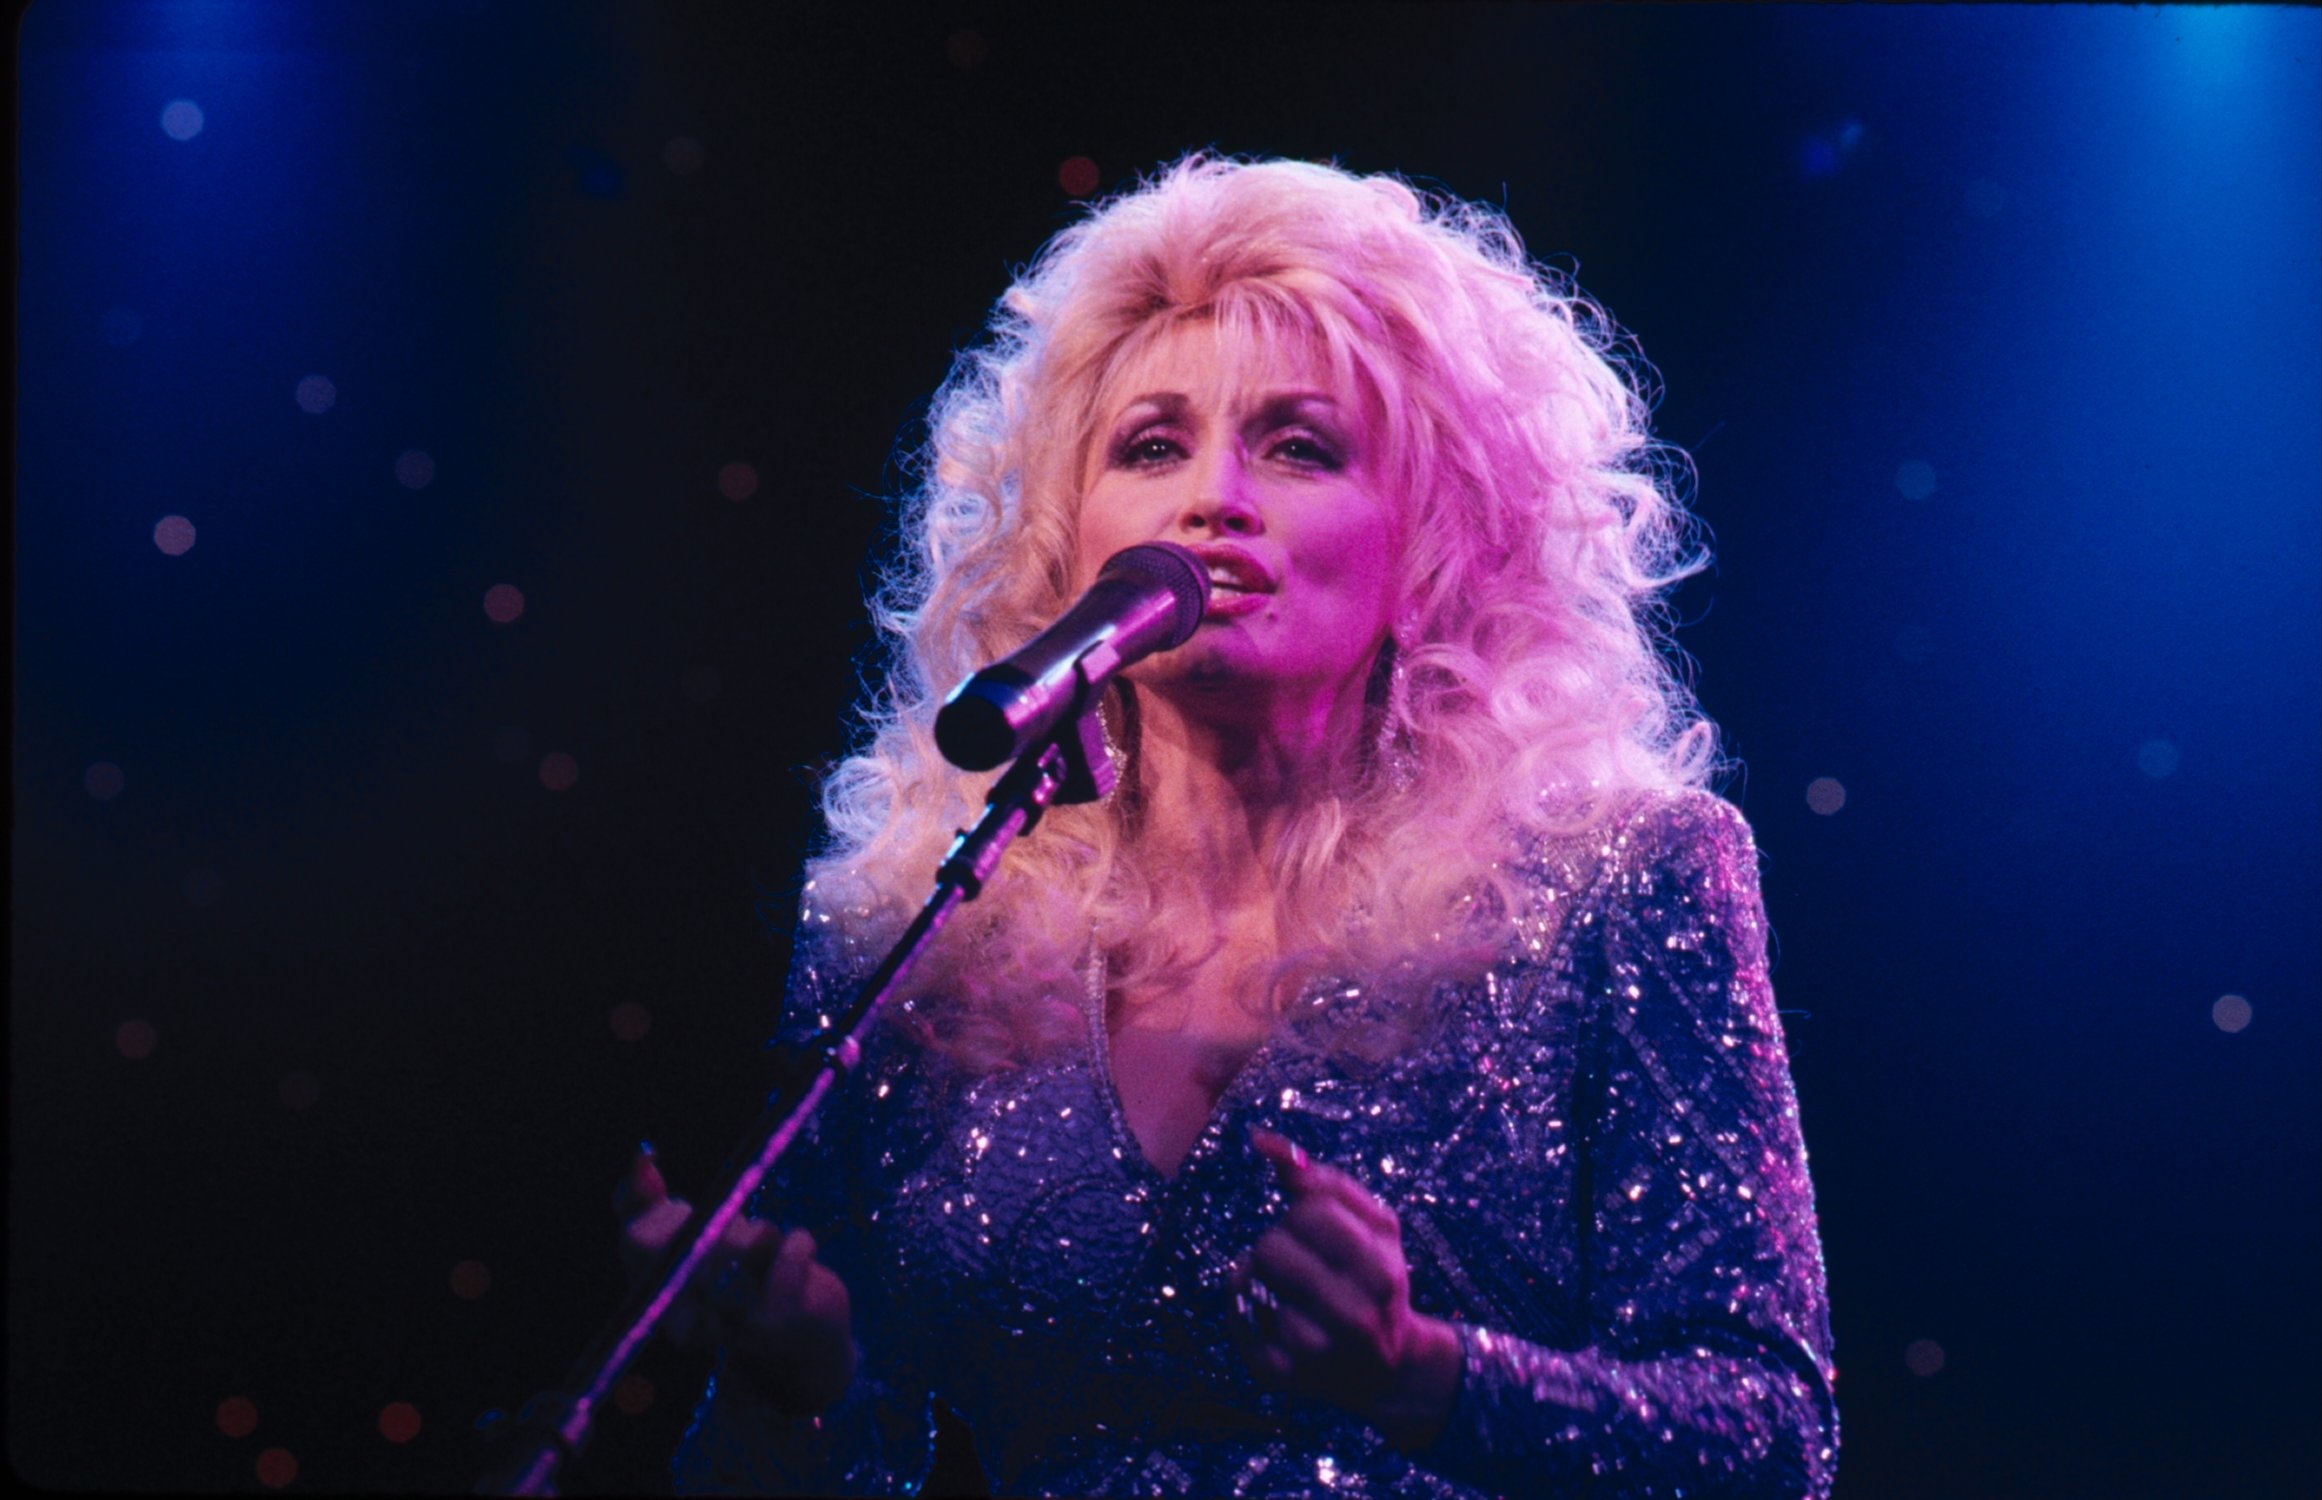 Dolly Parton singing into a microphone on stage.